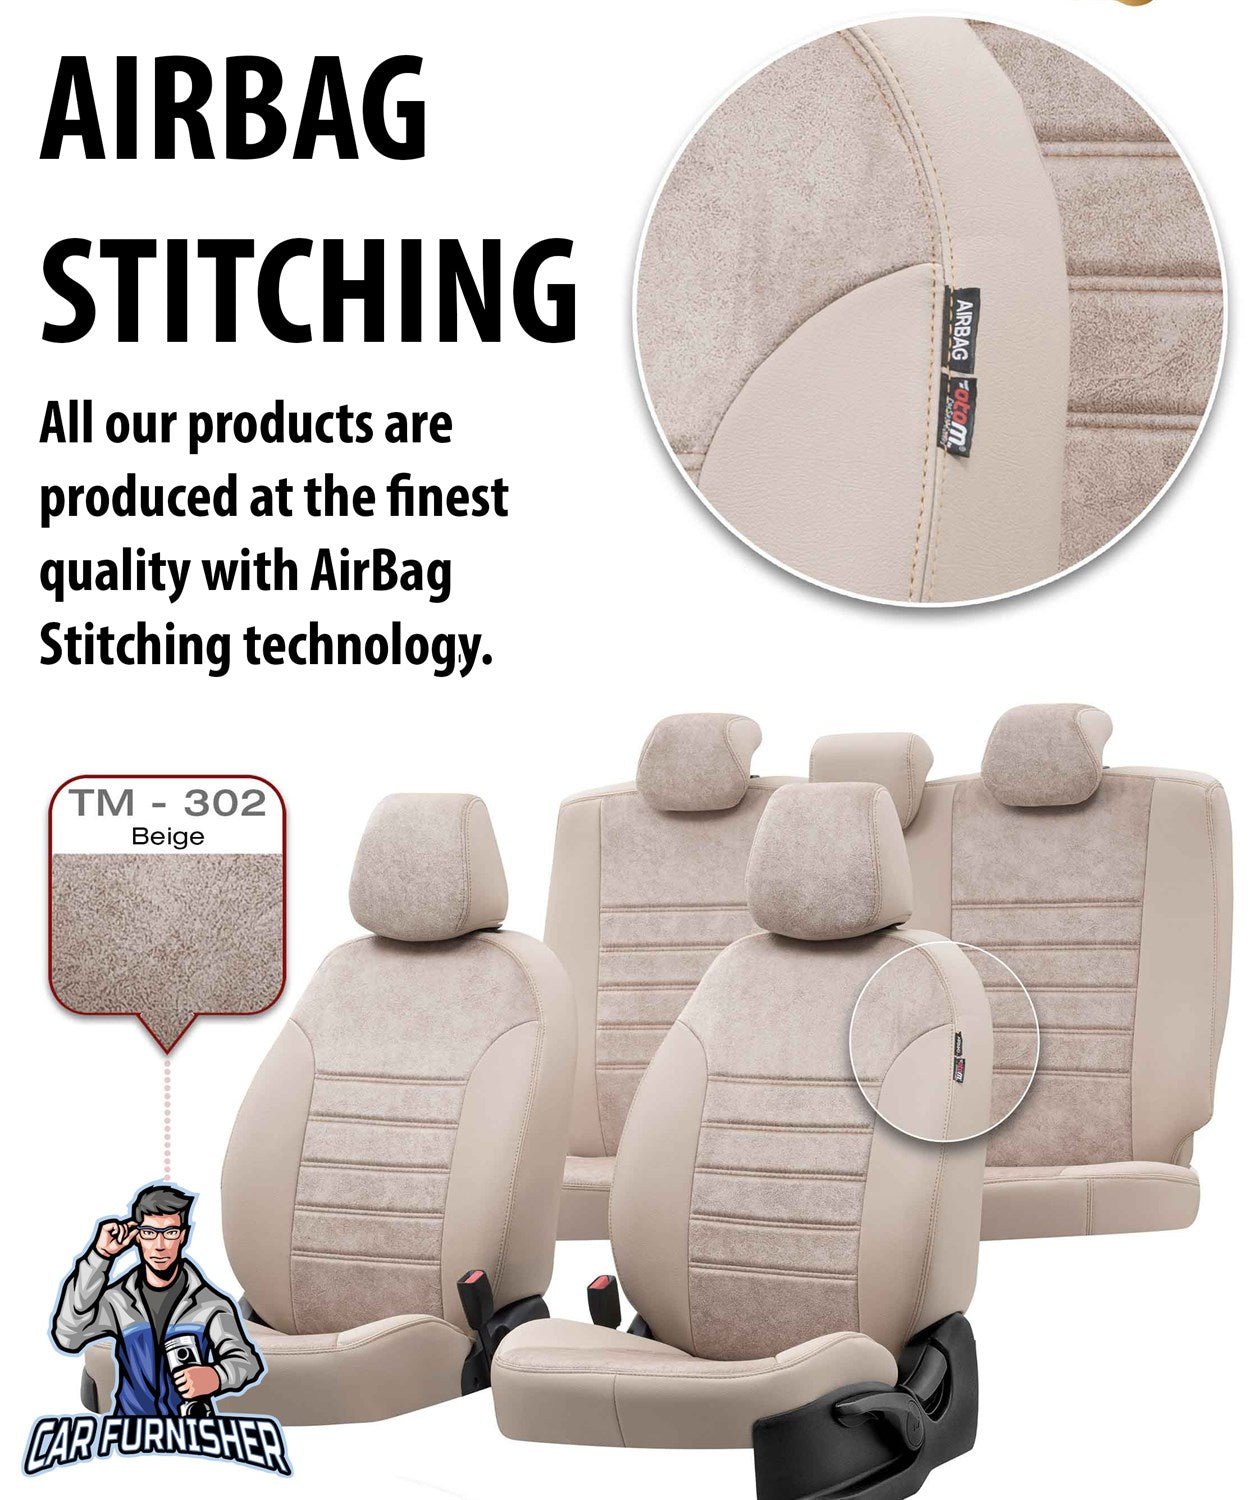 Jeep Compass Seat Covers Milano Suede Design Burgundy Leather & Suede Fabric